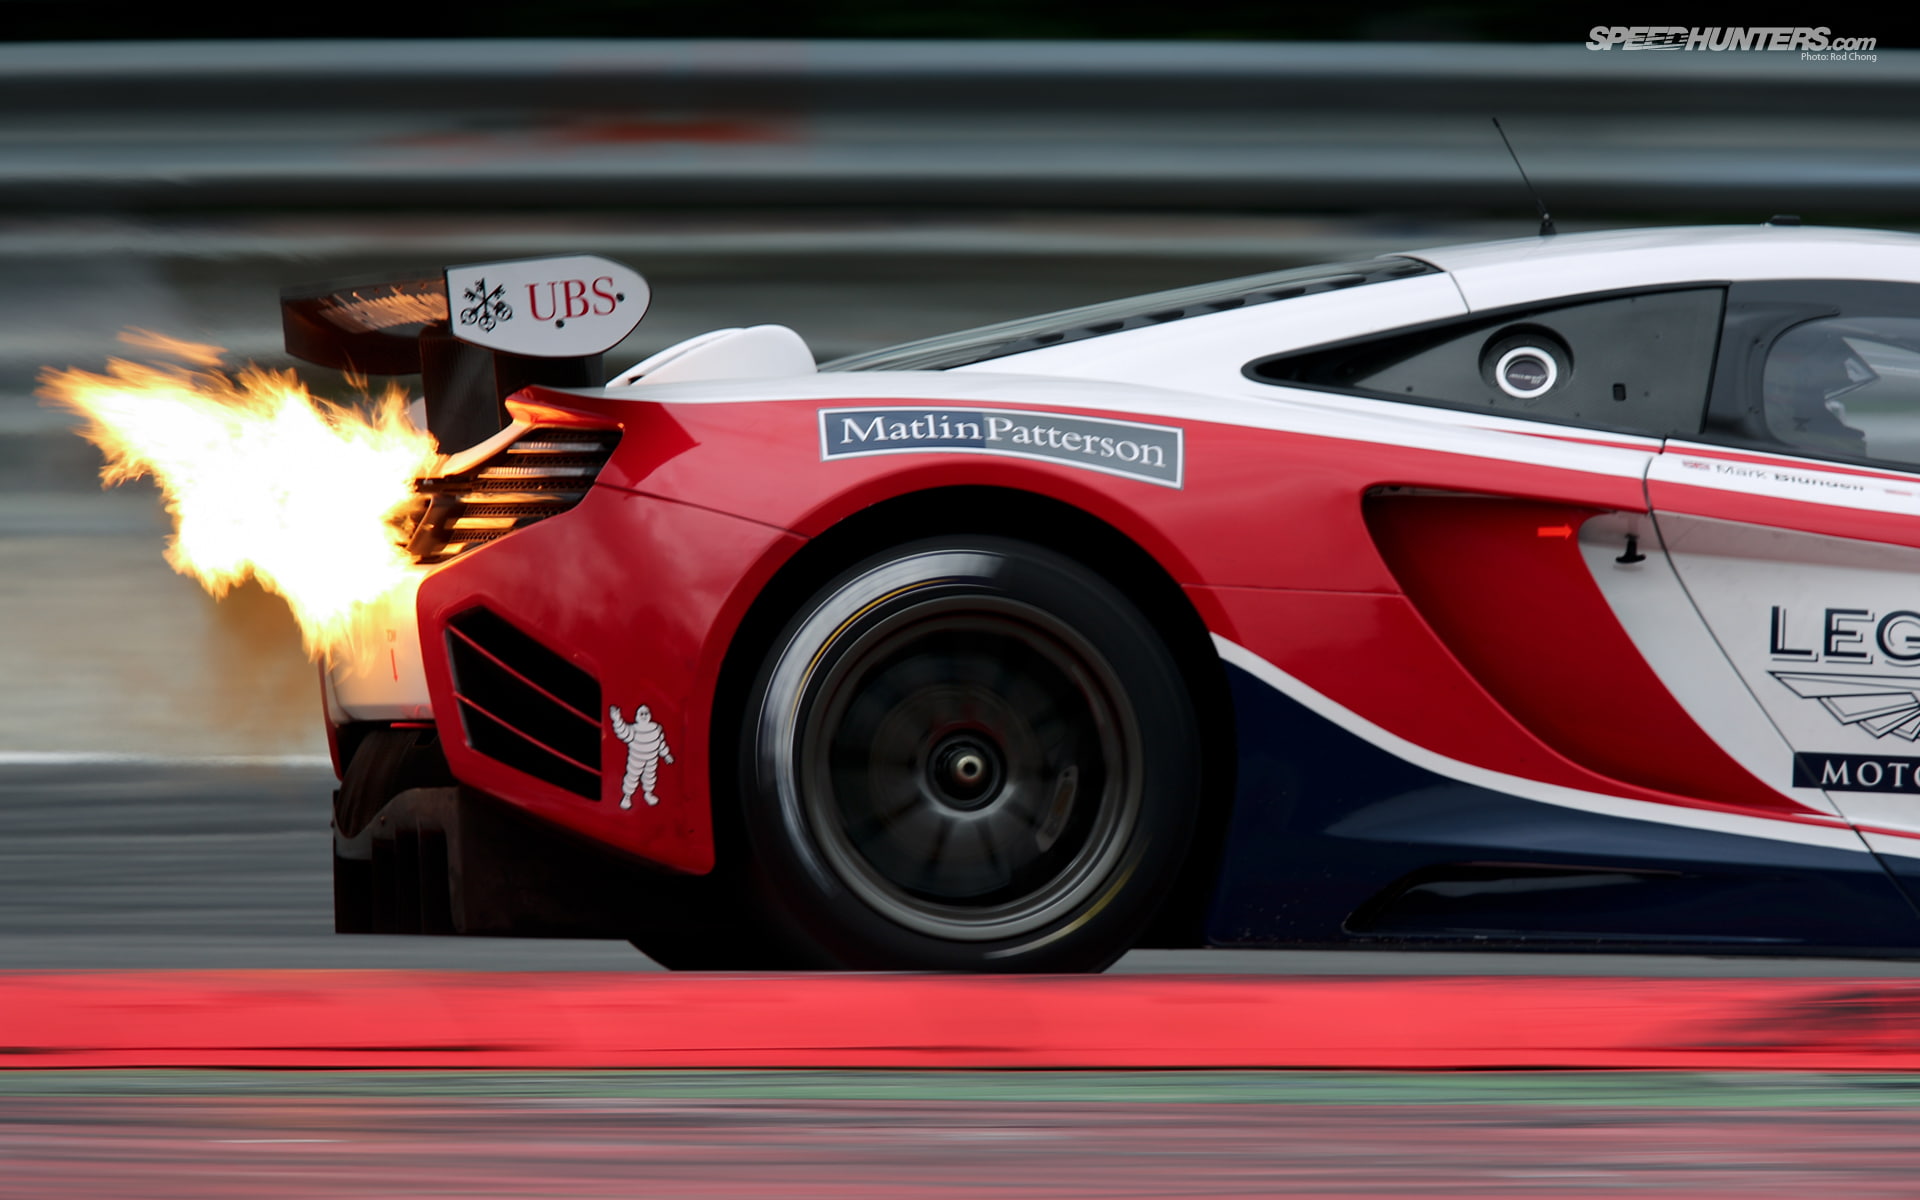 McLaren MP4-12C GT3 Backfire Flame Fire Motion Blur HD, red and white matlin patterson car